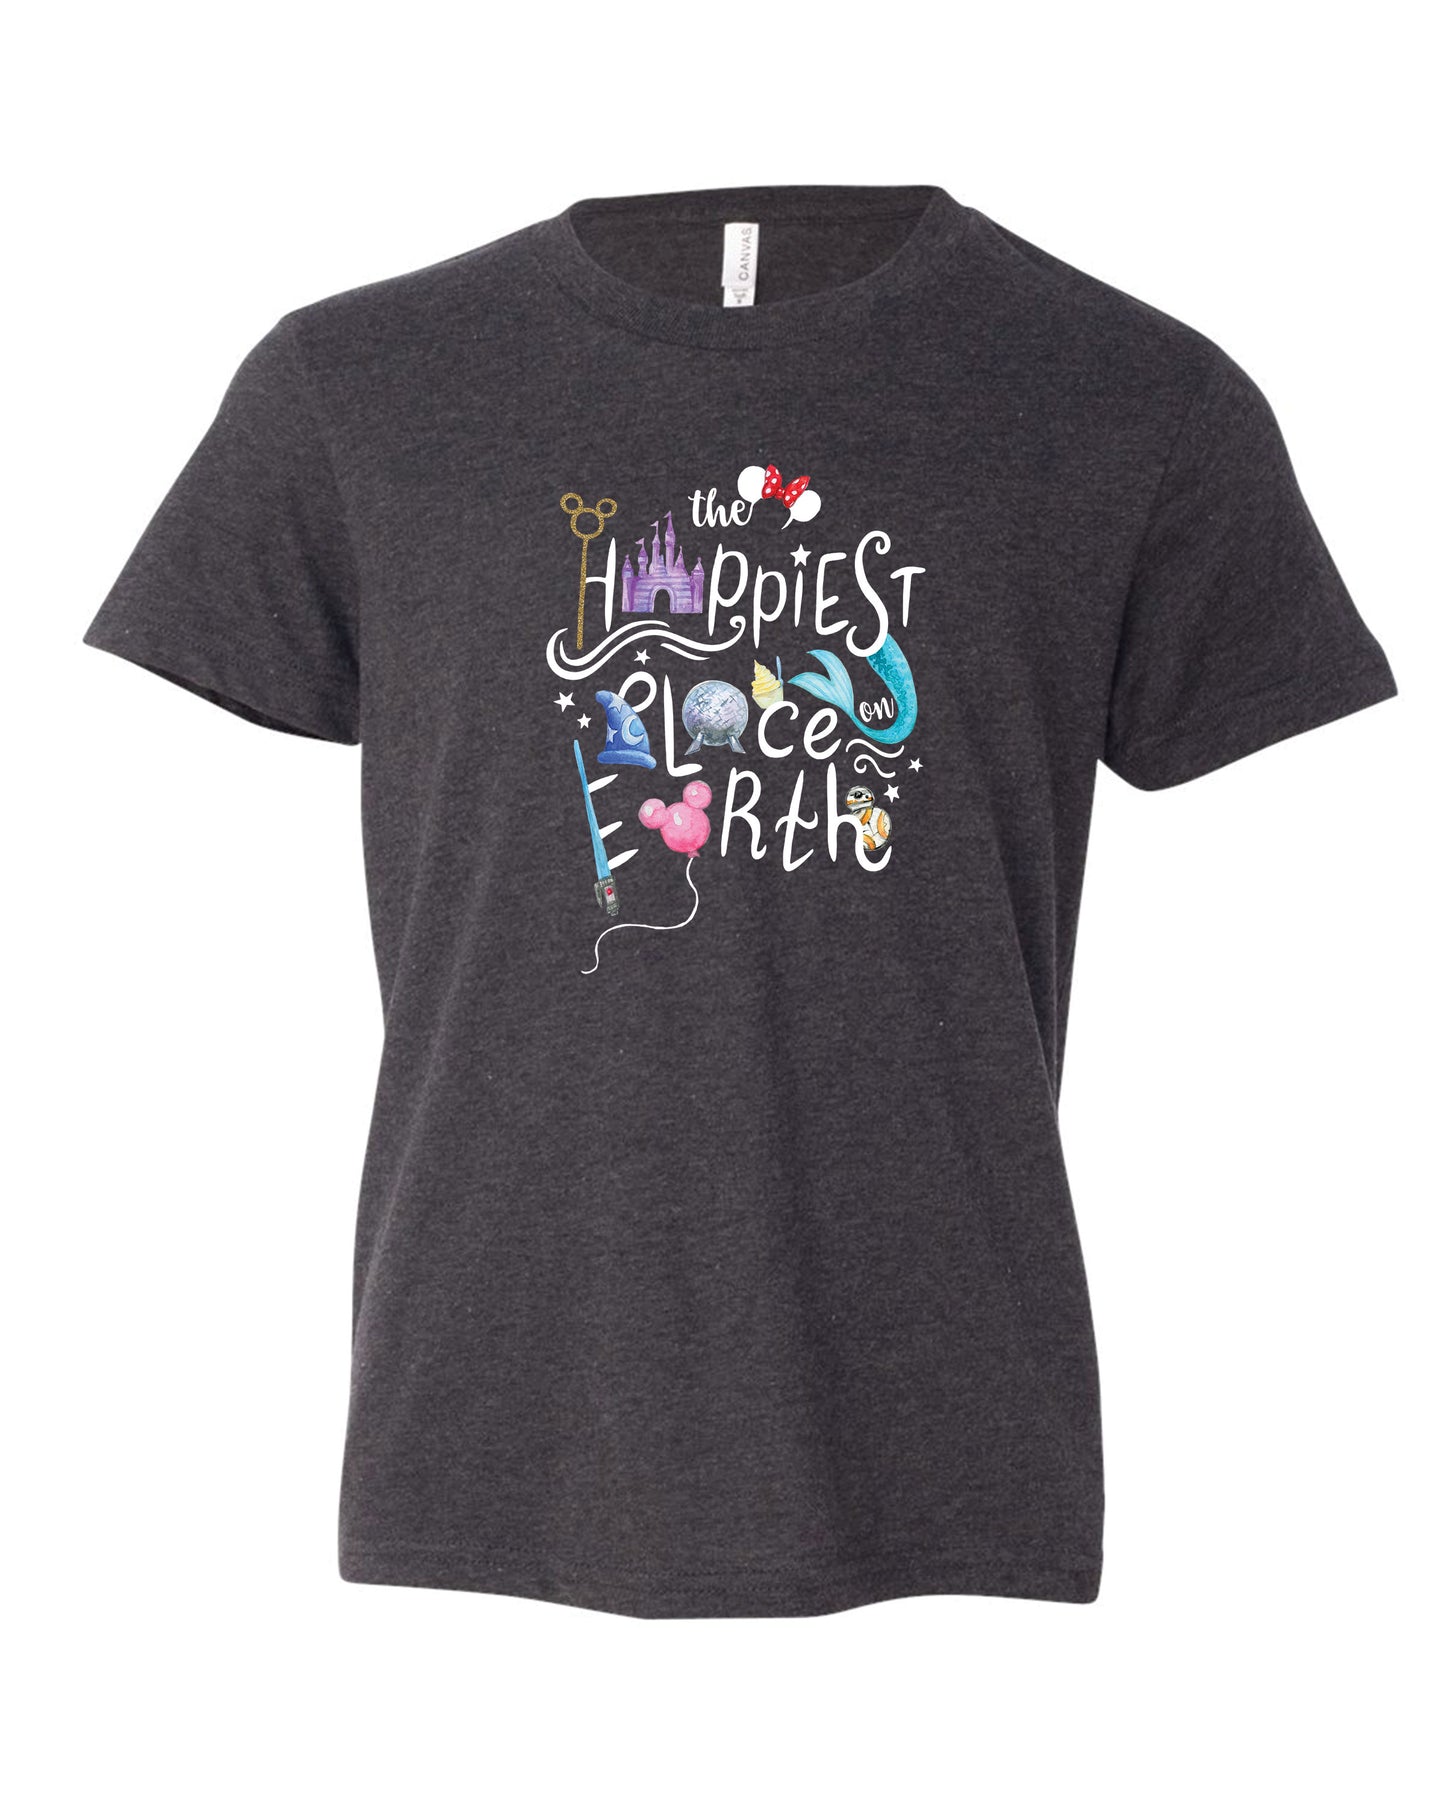 Happiest Mom on Earth | Tee | Adult-Adult Tee-Shirt Shop-Sister Shirts, Cute & Custom Tees for Mama & Littles in Trussville, Alabama.